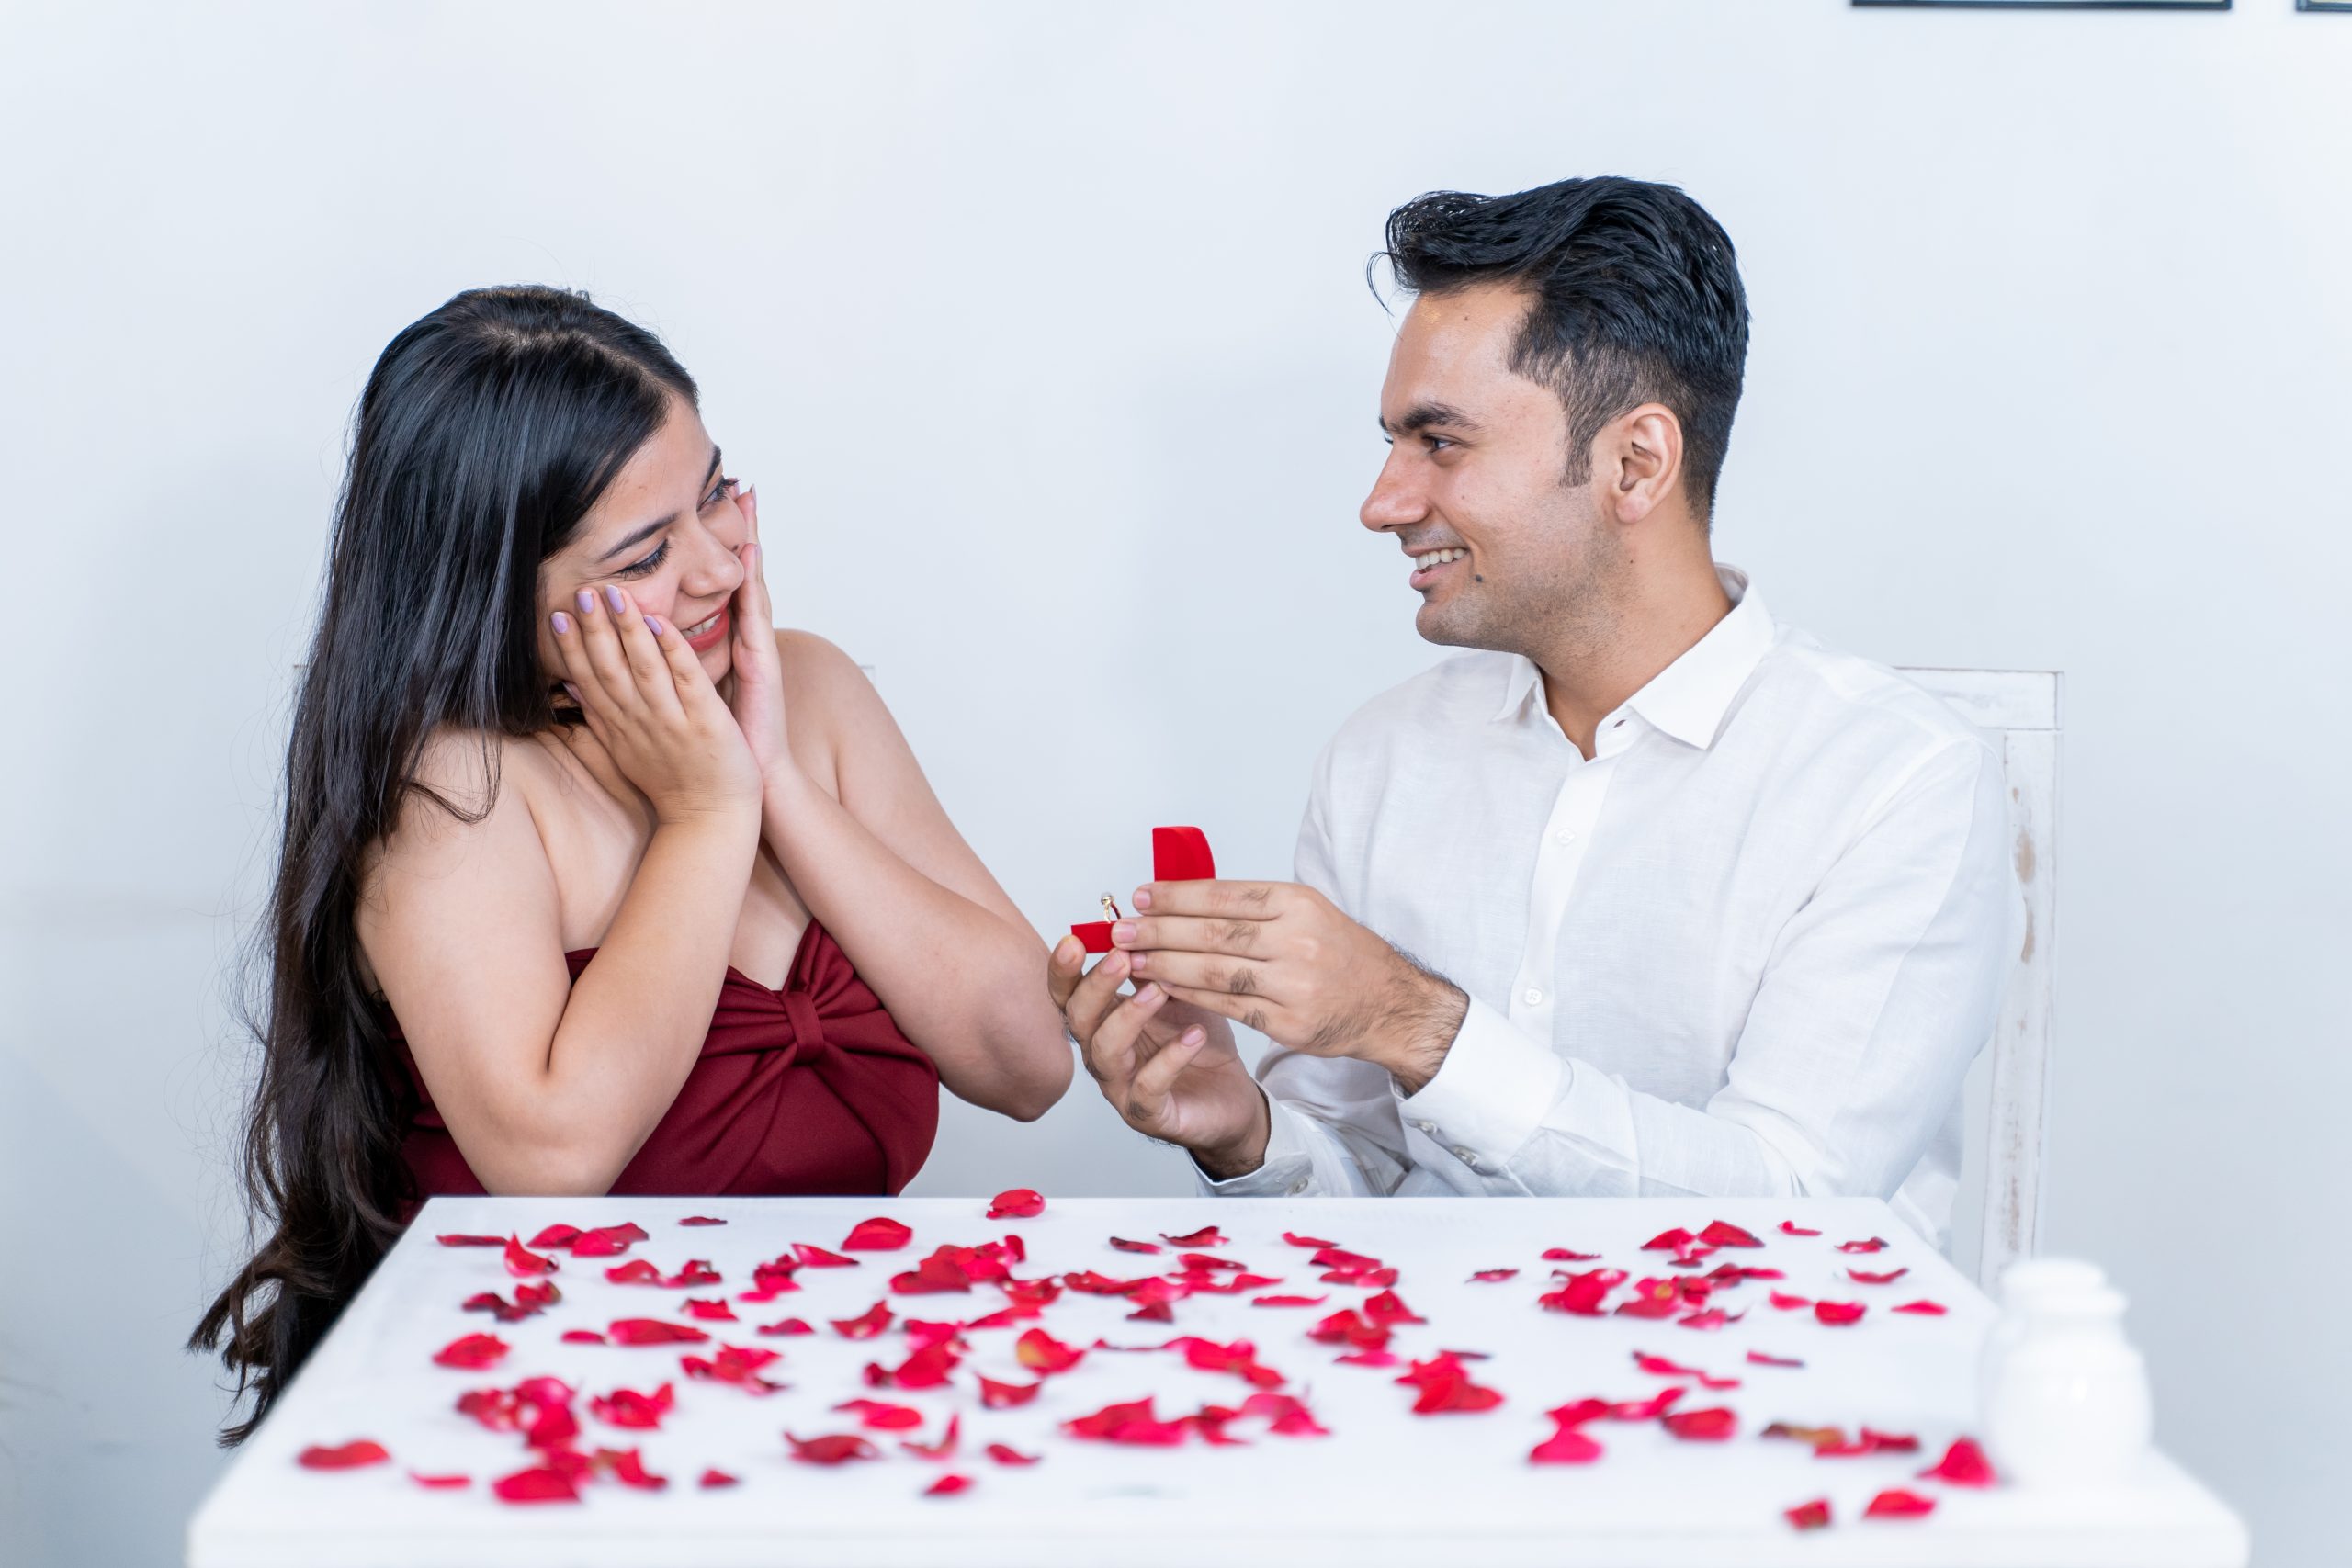 Girl getting happy seeing proposal